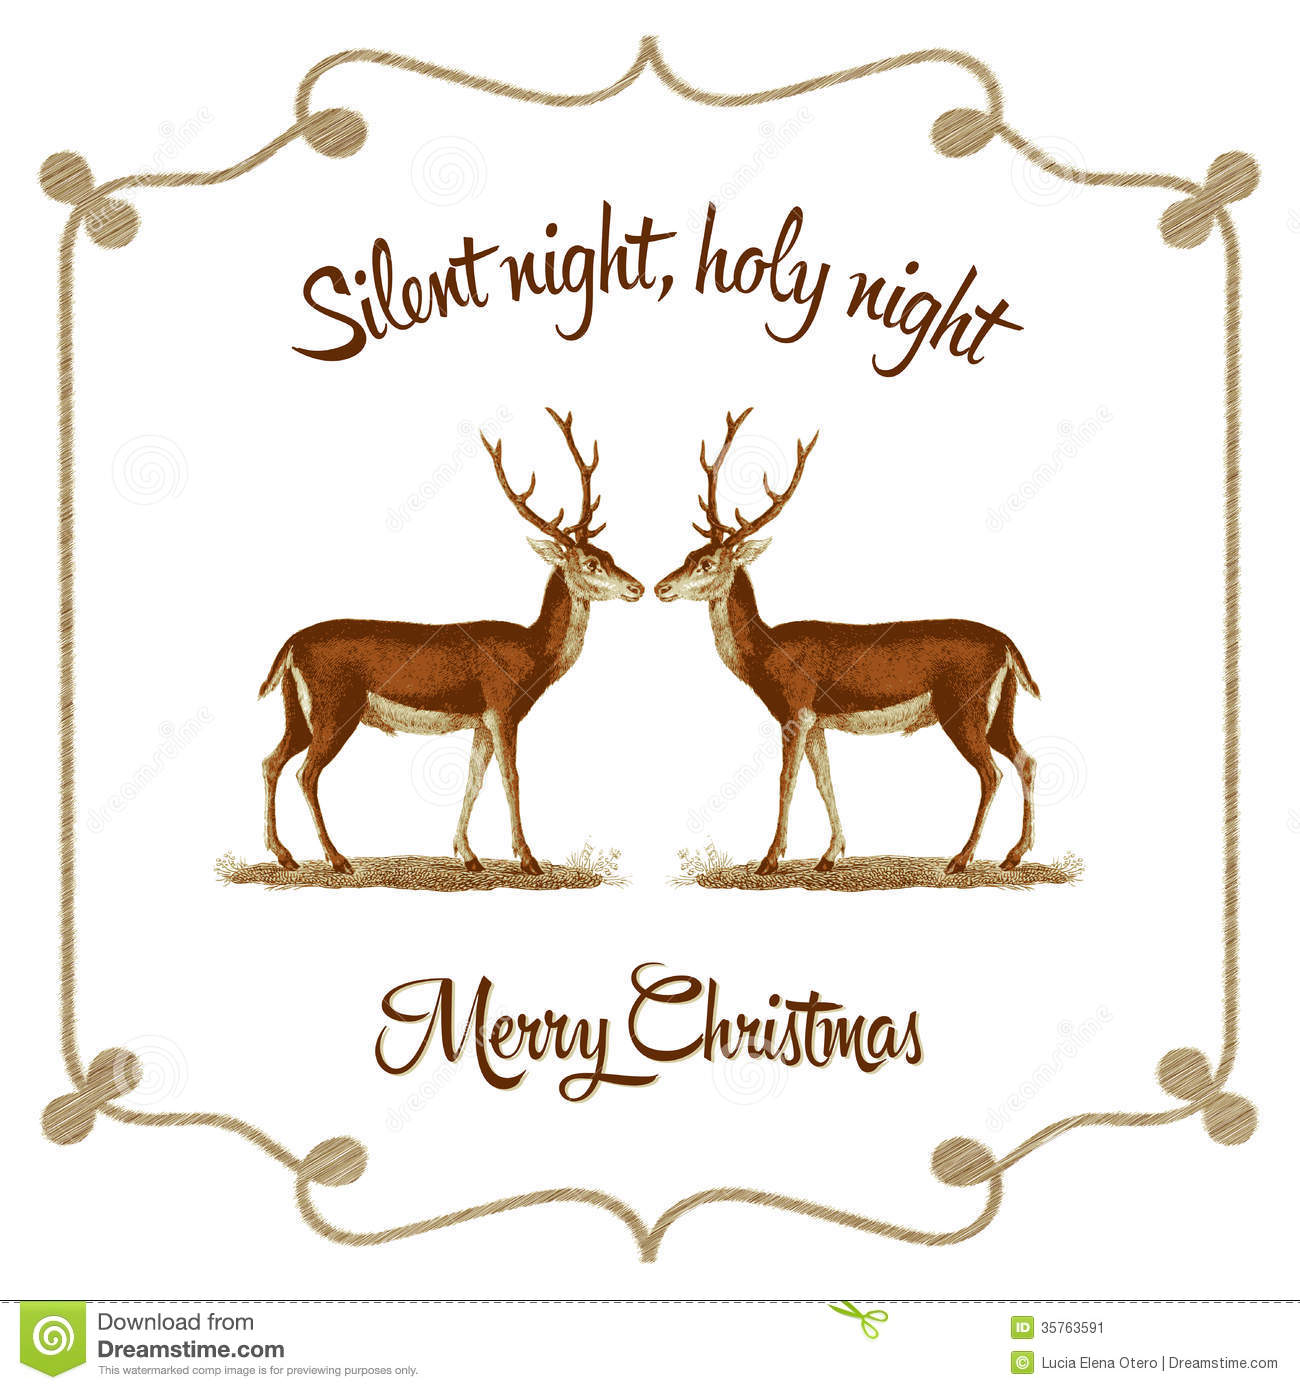 Greetings Card With Vintage Style  It Reads Silent Night Holy Night